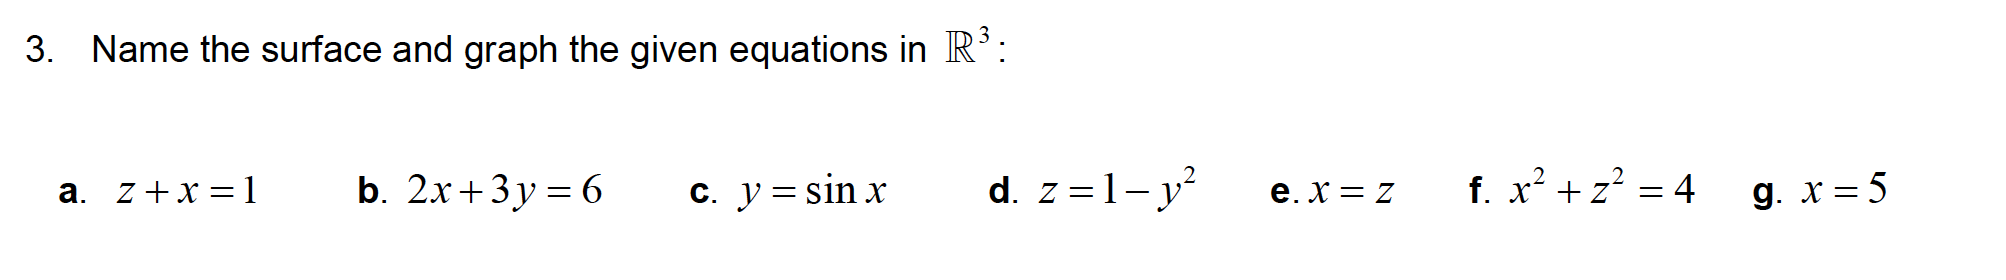 3. Name the surface and graph the given equations in R':
a. z+x = 1
b. 2x+3у%3D6
c. y = sin x
d. z =1- y
e. X = z
f. x² + z? = 4 g. x= 5
